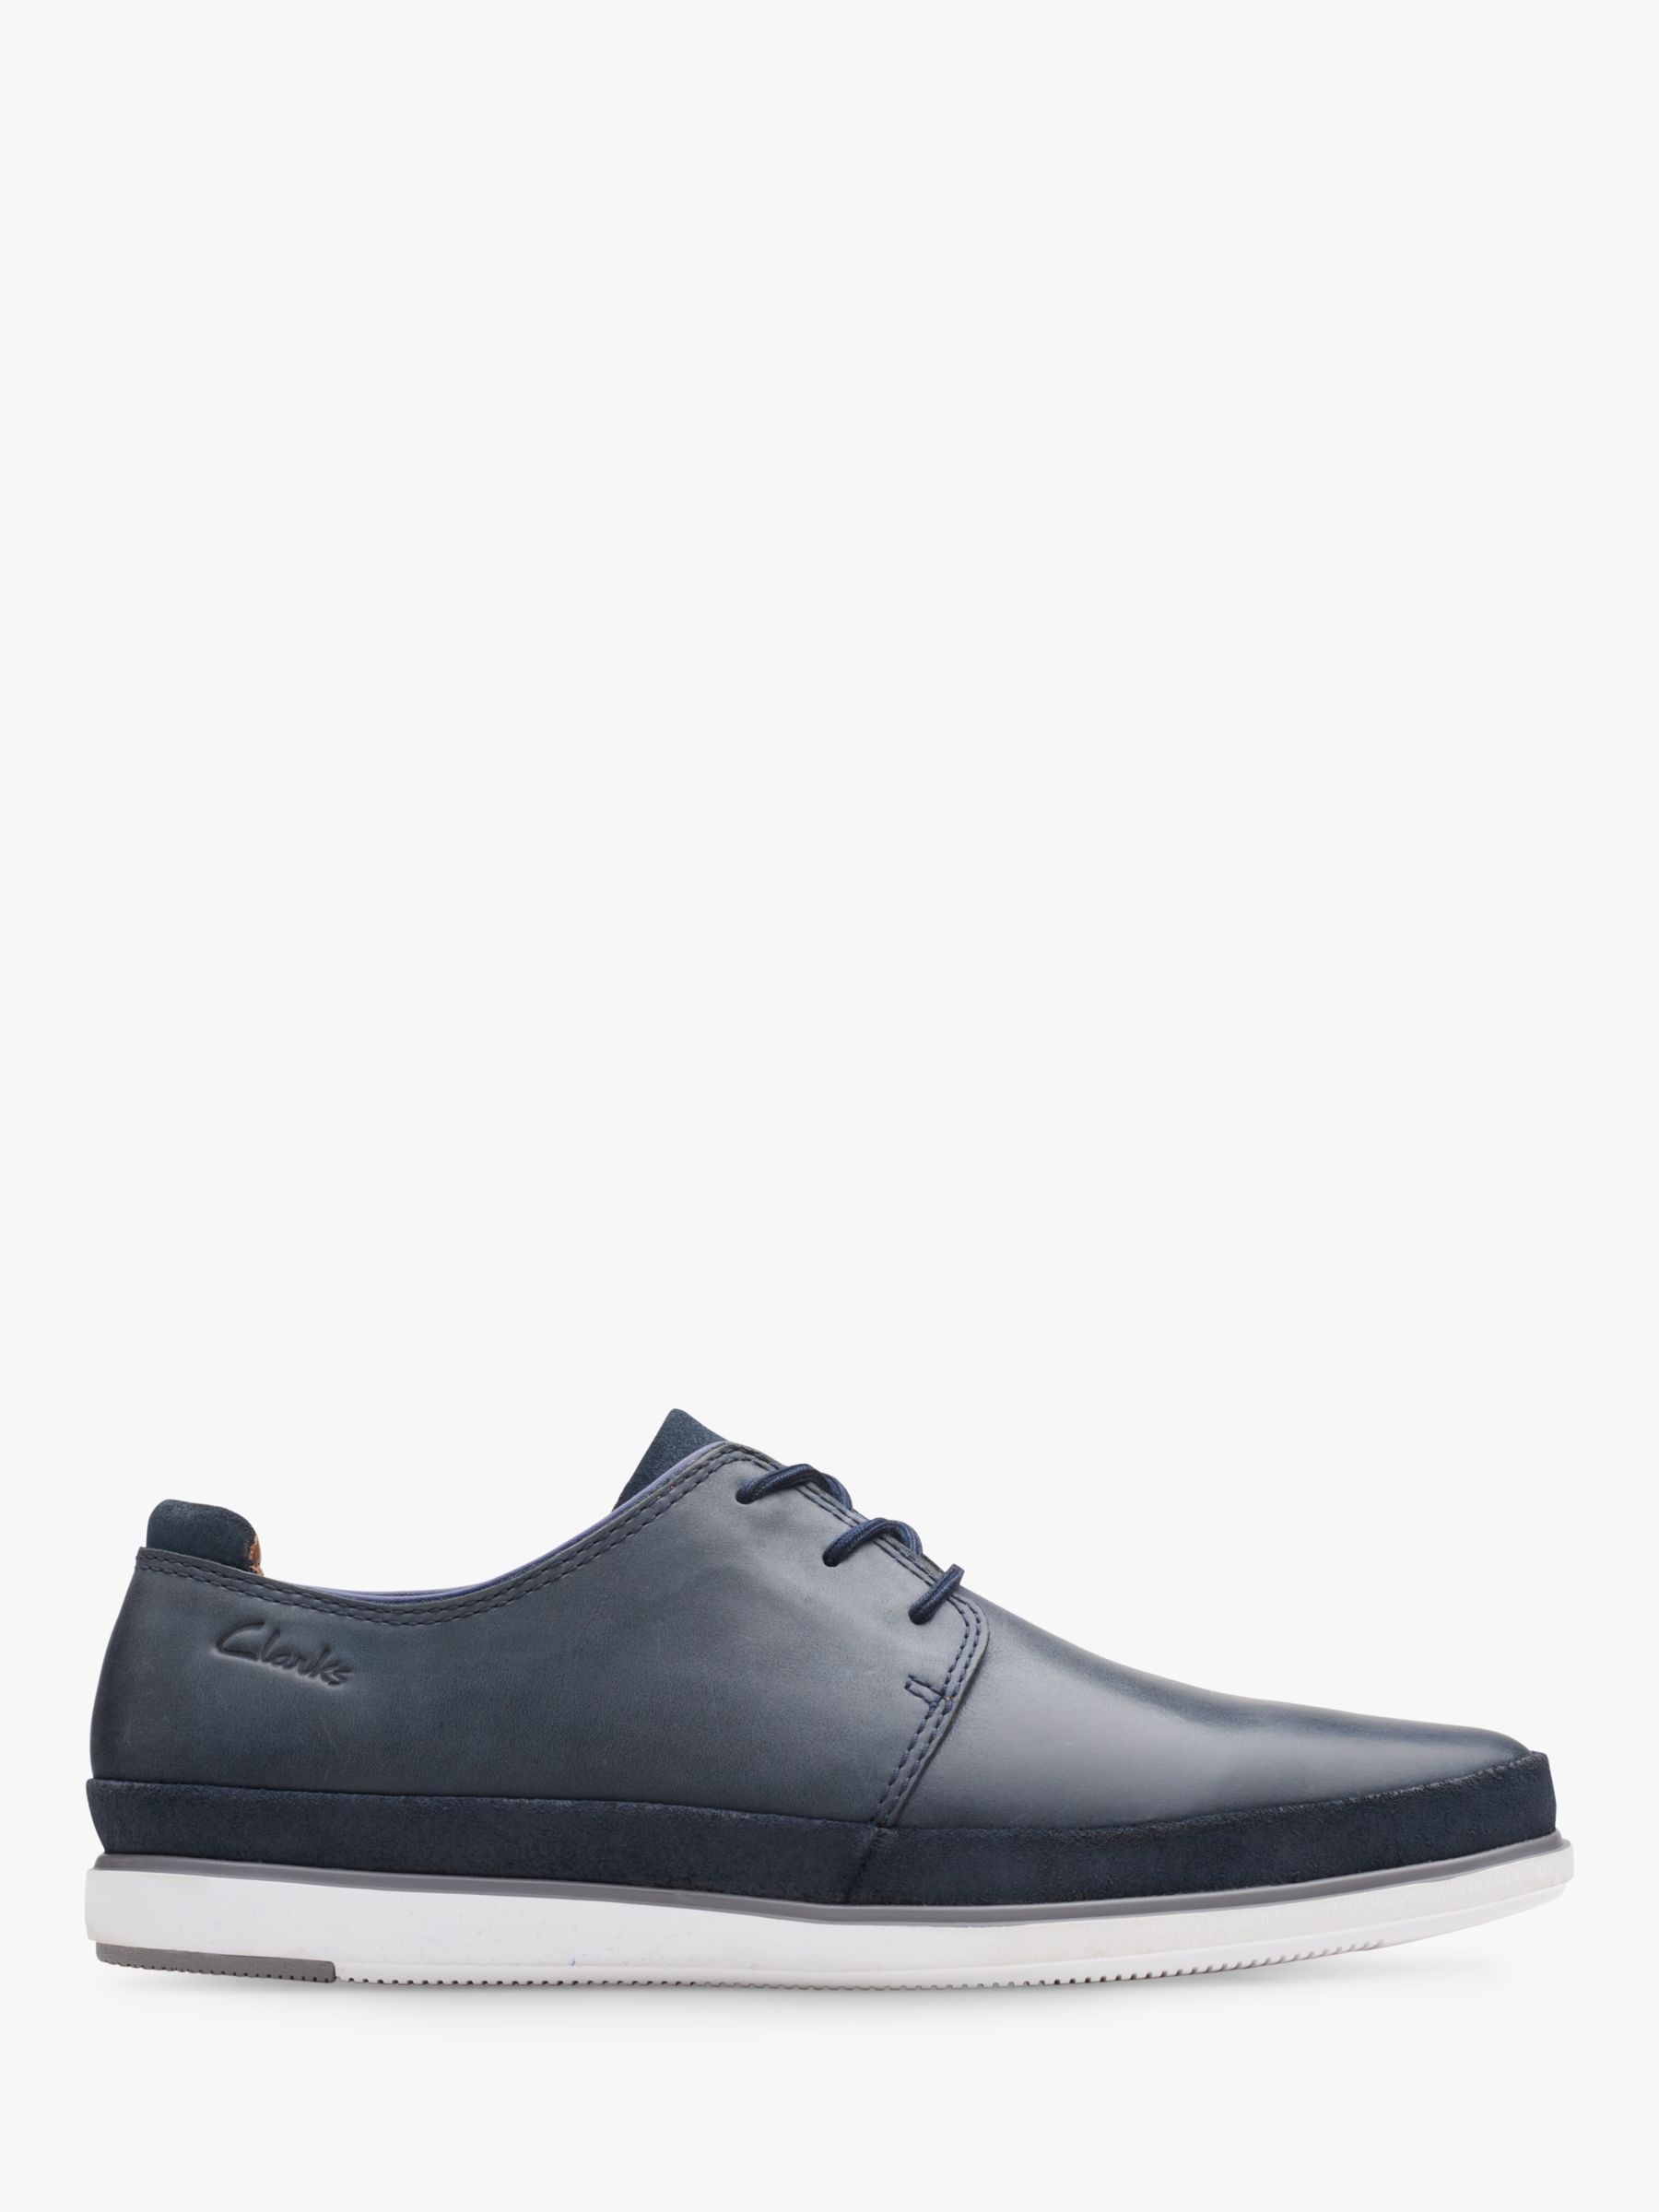 repulsion absorption Mantle Clarks Bratton Lace Up Casual Leather Shoes, Navy at John Lewis & Partners